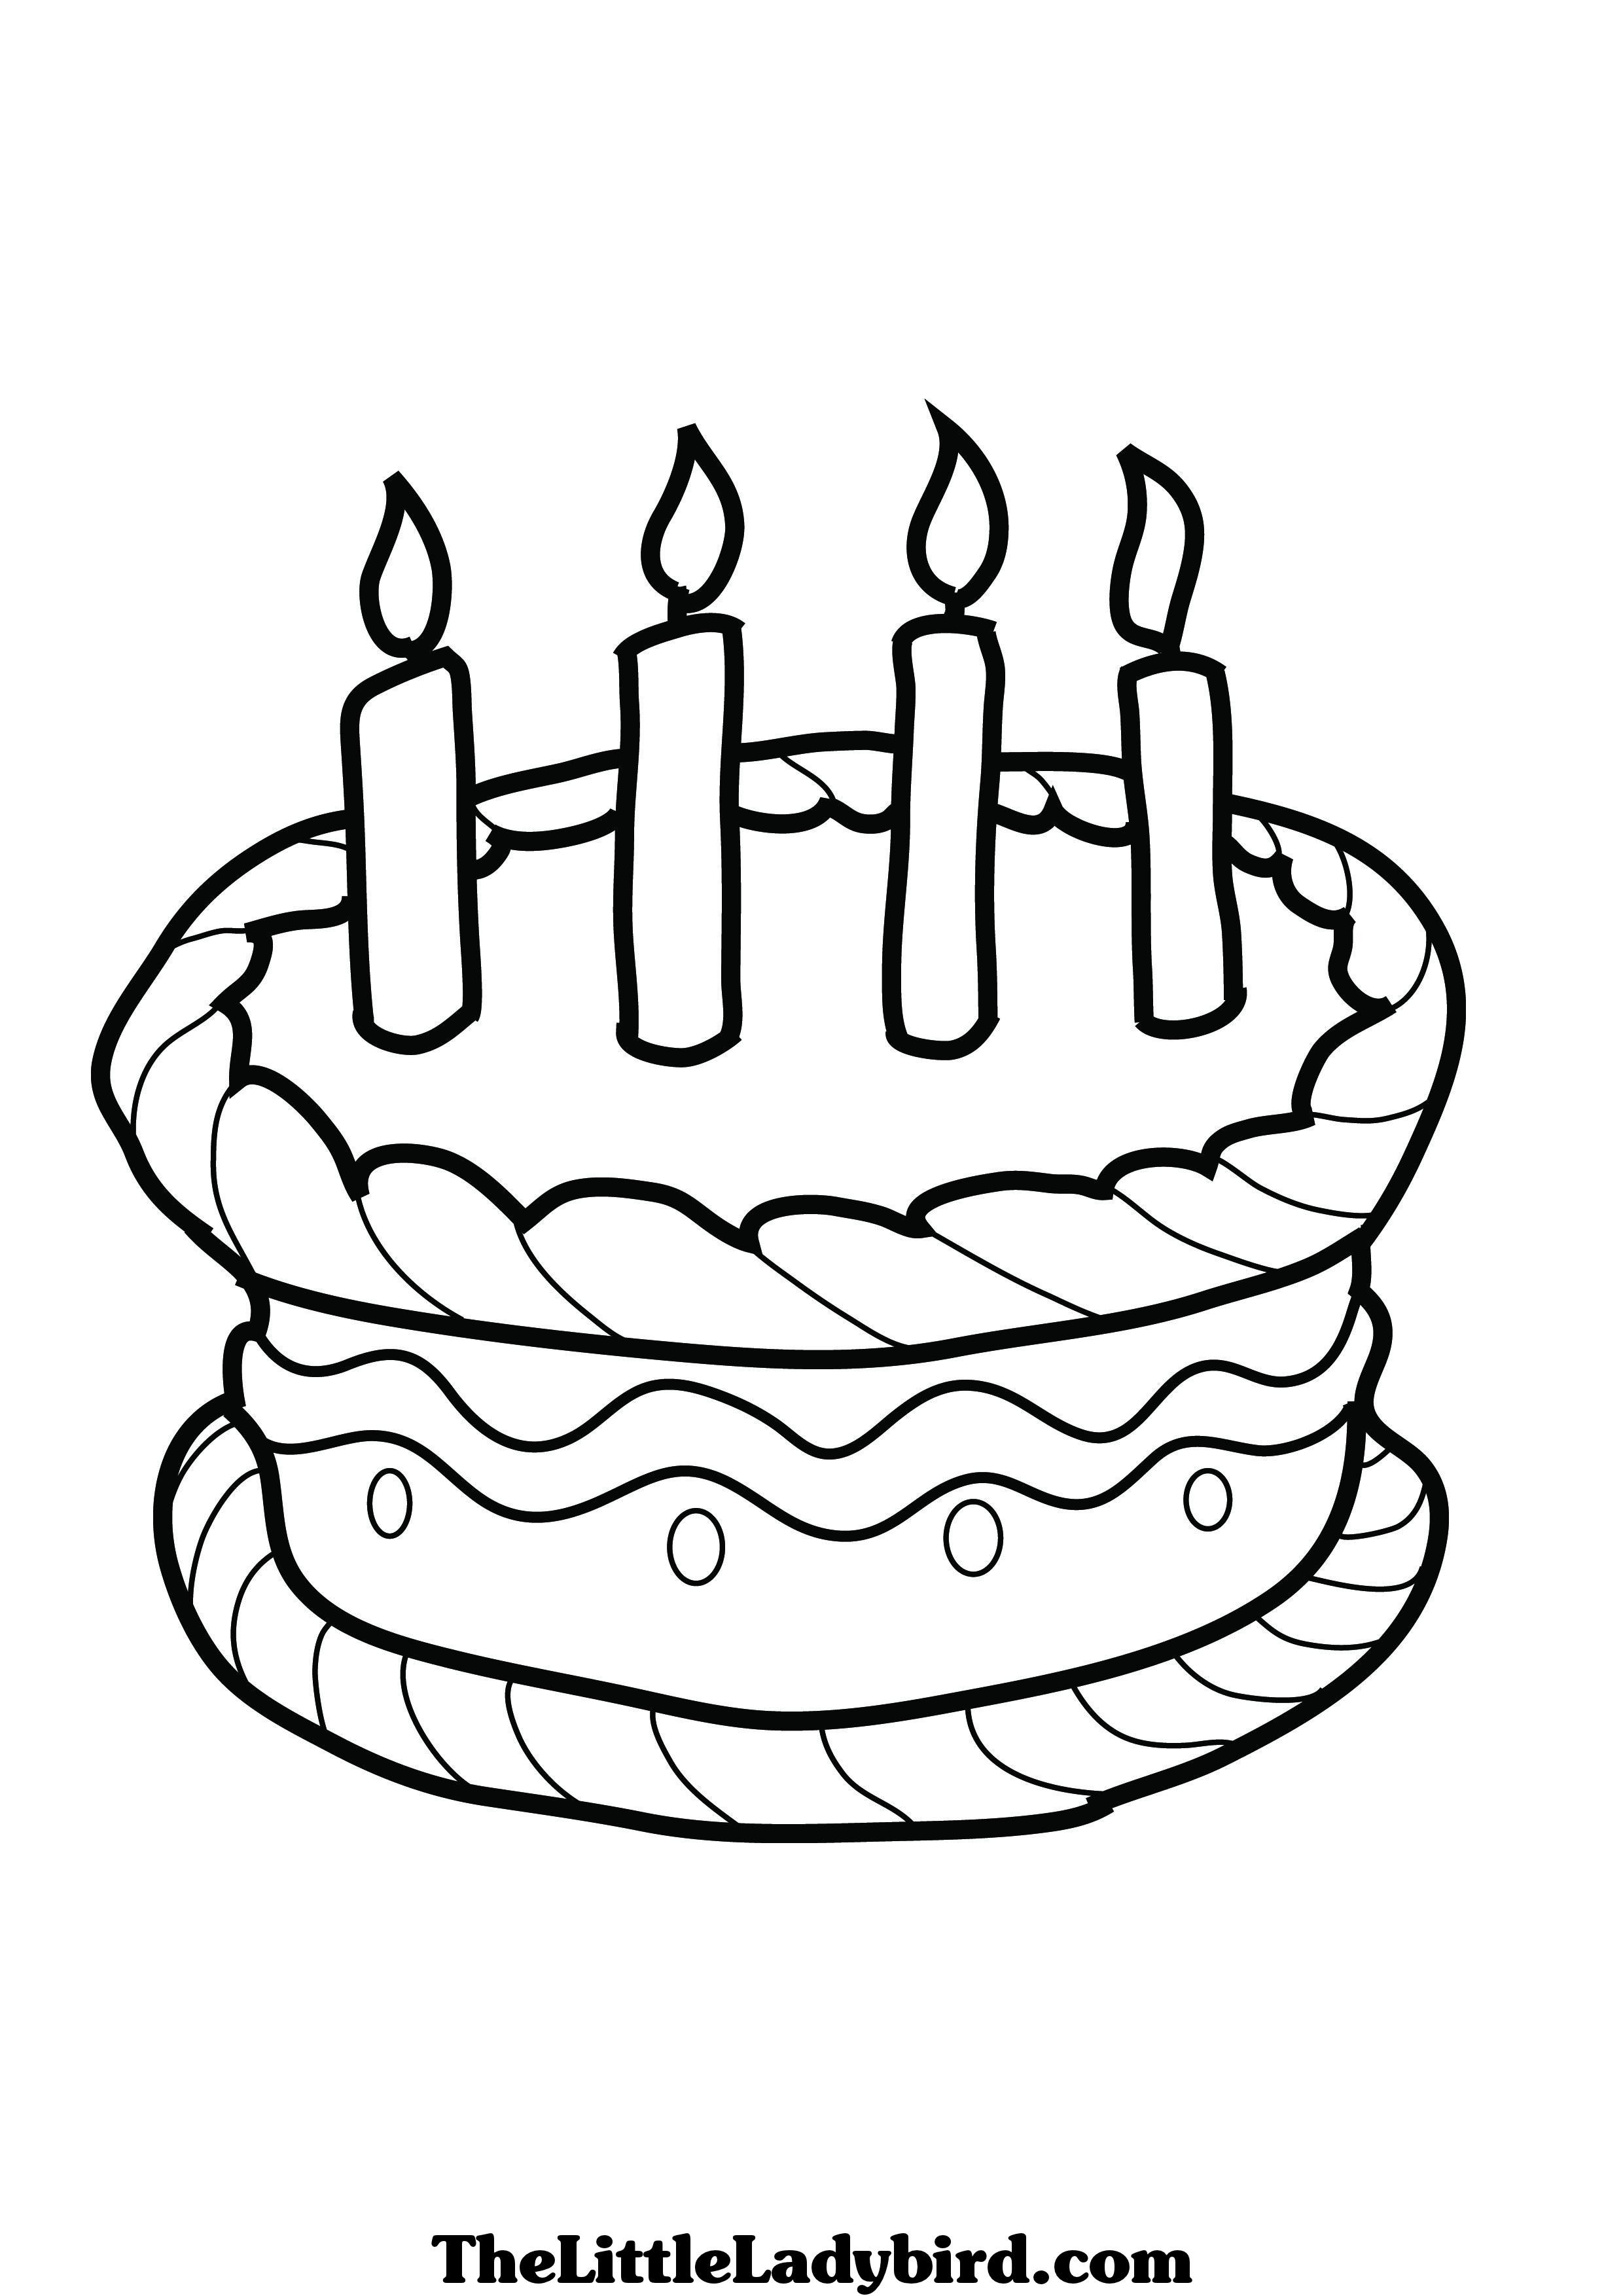 Slice Of Cake Coloring Page at GetDrawings Free download